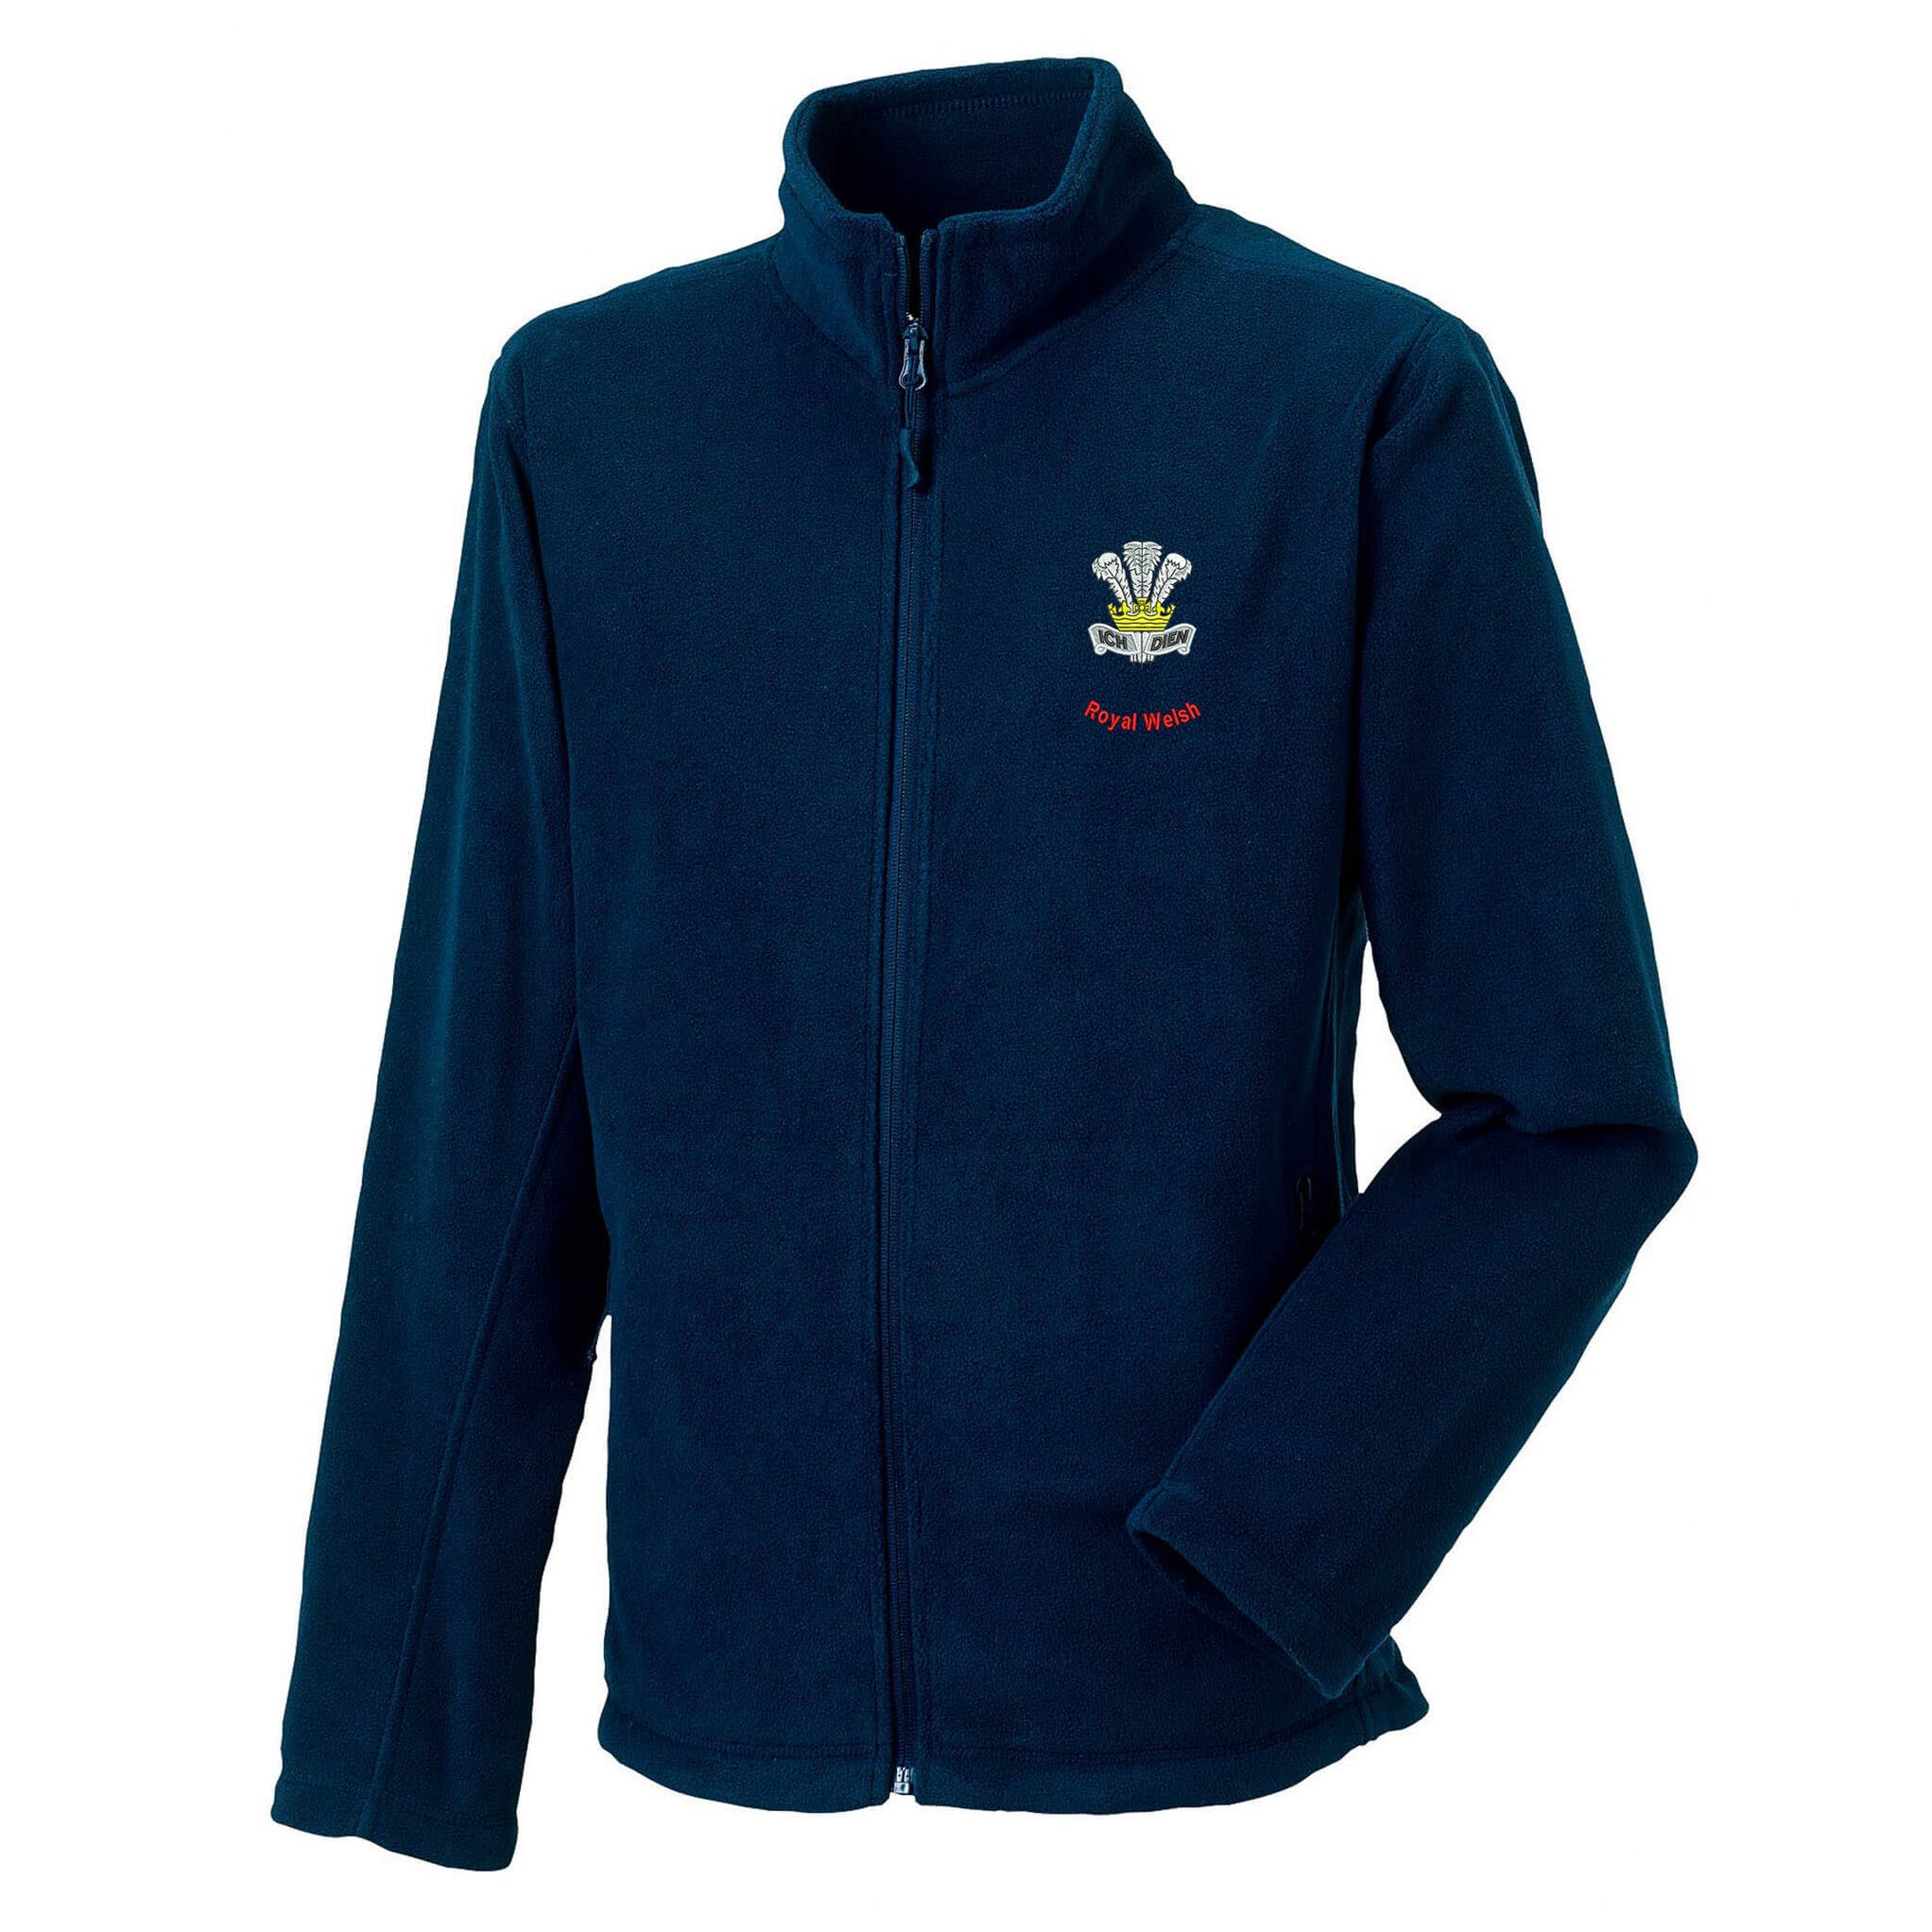 Royal Welsh Fleece — The Military Store